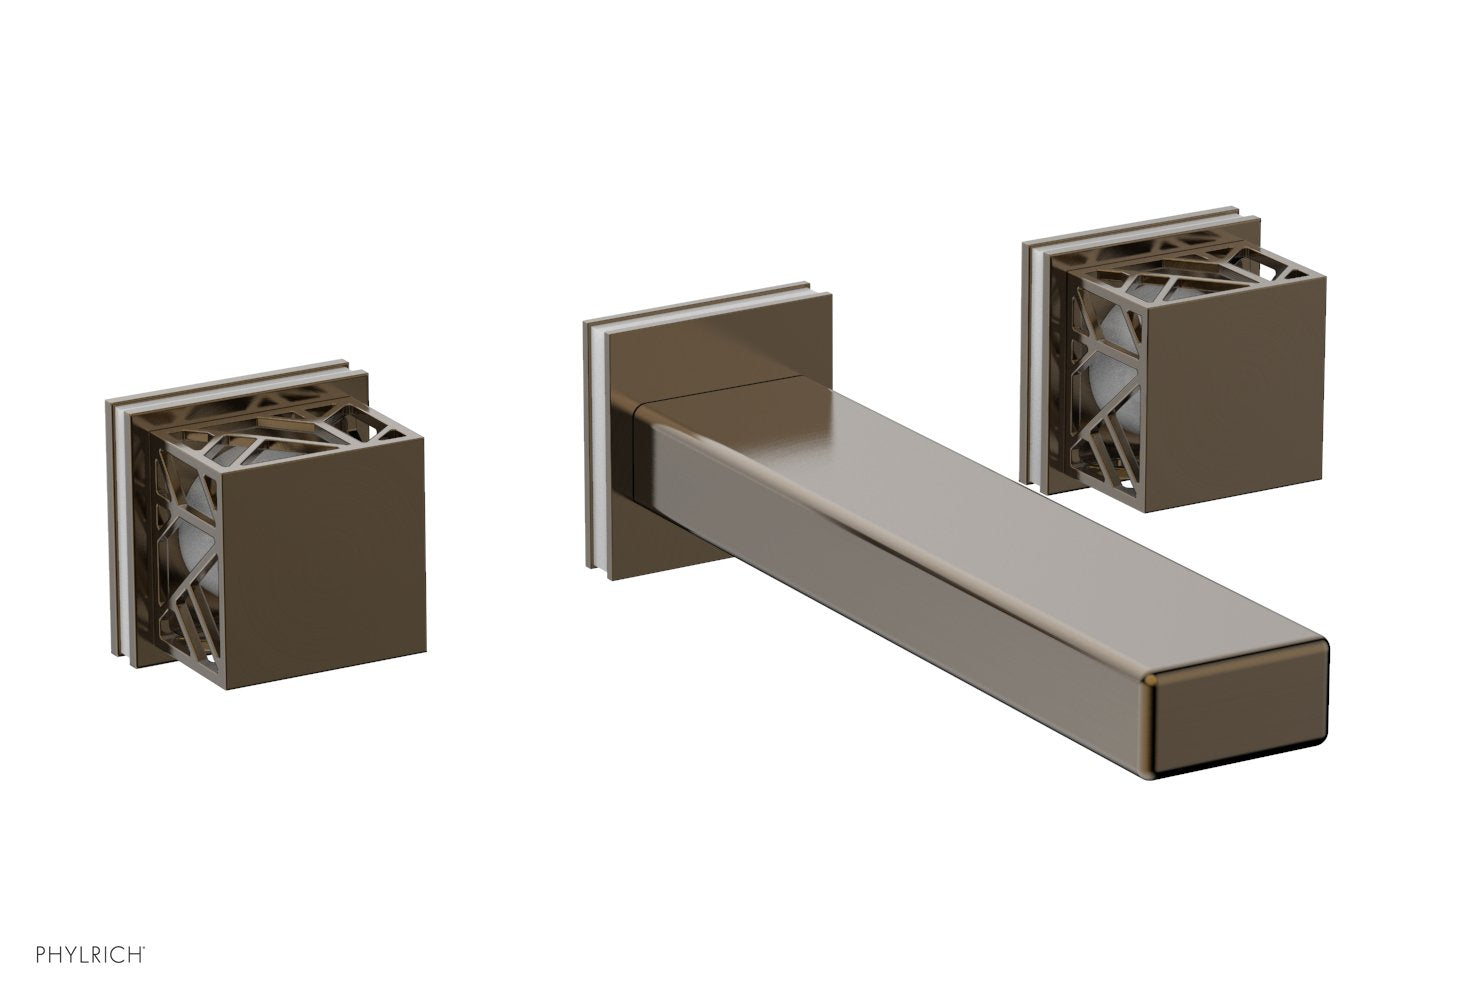 Phylrich JOLIE Wall Tub Set - Square Handles with "White" Accents